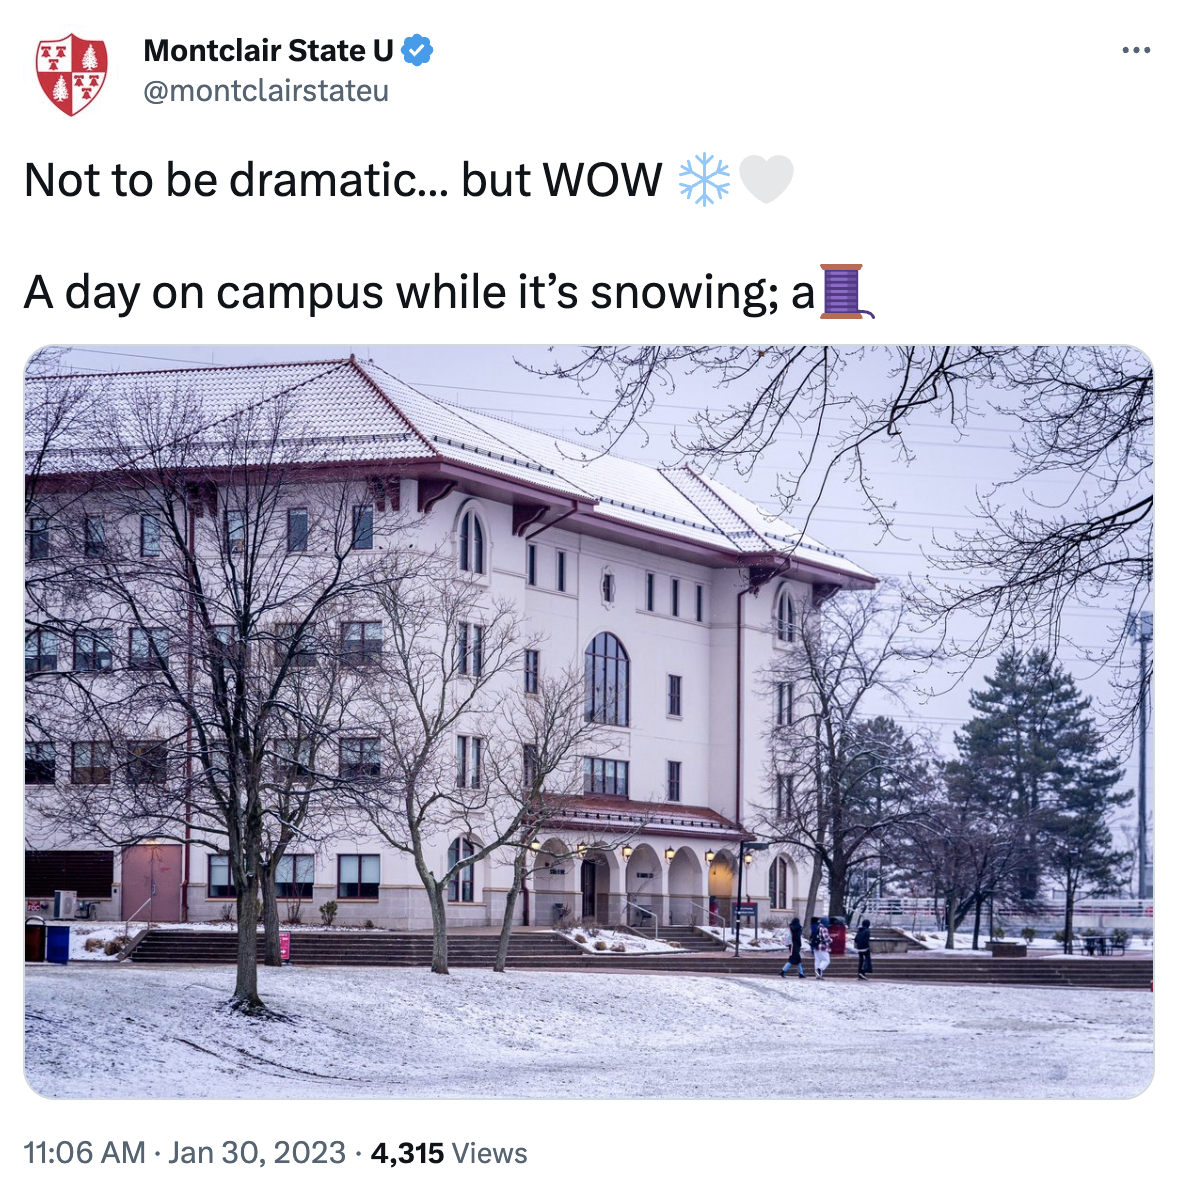 Not to be dramatic… but WOW (snowflake, heart). A day on campus while it’s snowing.